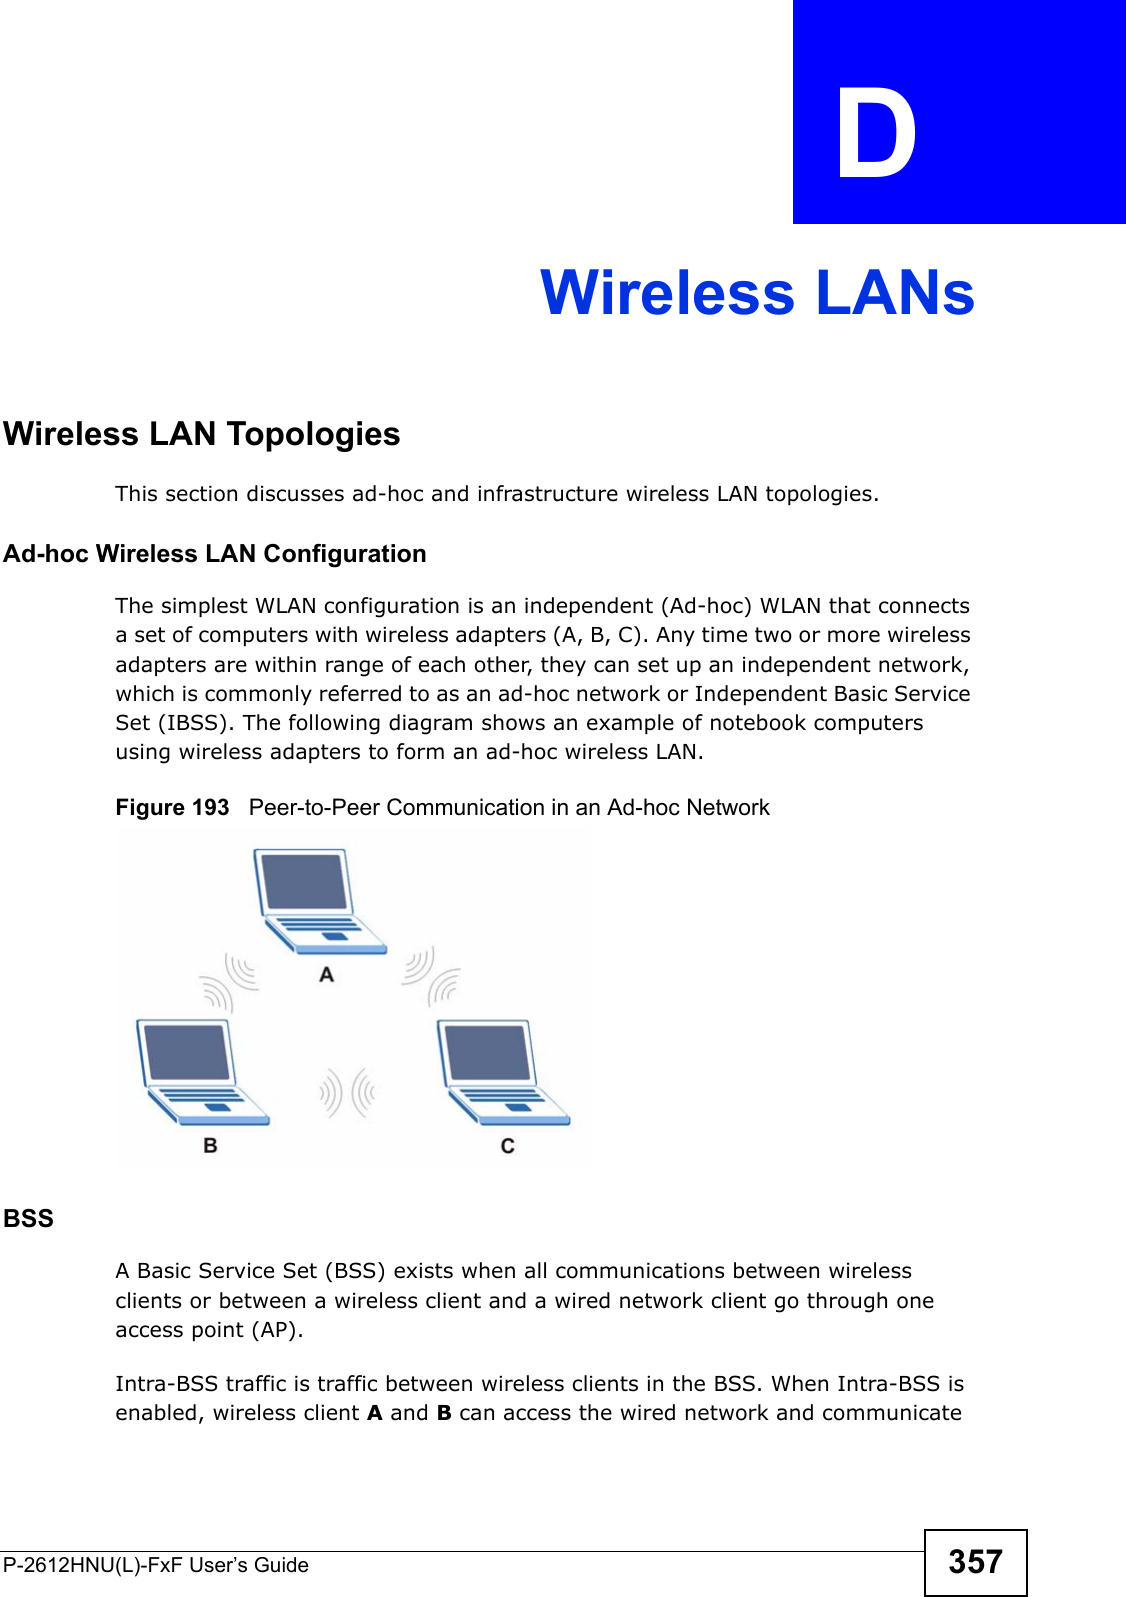 P-2612HNU(L)-FxF User’s Guide 357APPENDIX   D Wireless LANsWireless LAN TopologiesThis section discusses ad-hoc and infrastructure wireless LAN topologies.Ad-hoc Wireless LAN ConfigurationThe simplest WLAN configuration is an independent (Ad-hoc) WLAN that connectsa set of computers with wireless adapters (A, B, C). Any time two or more wireless adapters are within range of each other, they can set up an independent network, which is commonly referred to as an ad-hoc network or Independent Basic ServiceSet (IBSS). The following diagram shows an example of notebook computersusing wireless adapters to form an ad-hoc wireless LAN. Figure 193   Peer-to-Peer Communication in an Ad-hoc NetworkBSSA Basic Service Set (BSS) exists when all communications between wirelessclients or between a wireless client and a wired network client go through one access point (AP). Intra-BSS traffic is traffic between wireless clients in the BSS. When Intra-BSS isenabled, wireless client A and B can access the wired network and communicate 